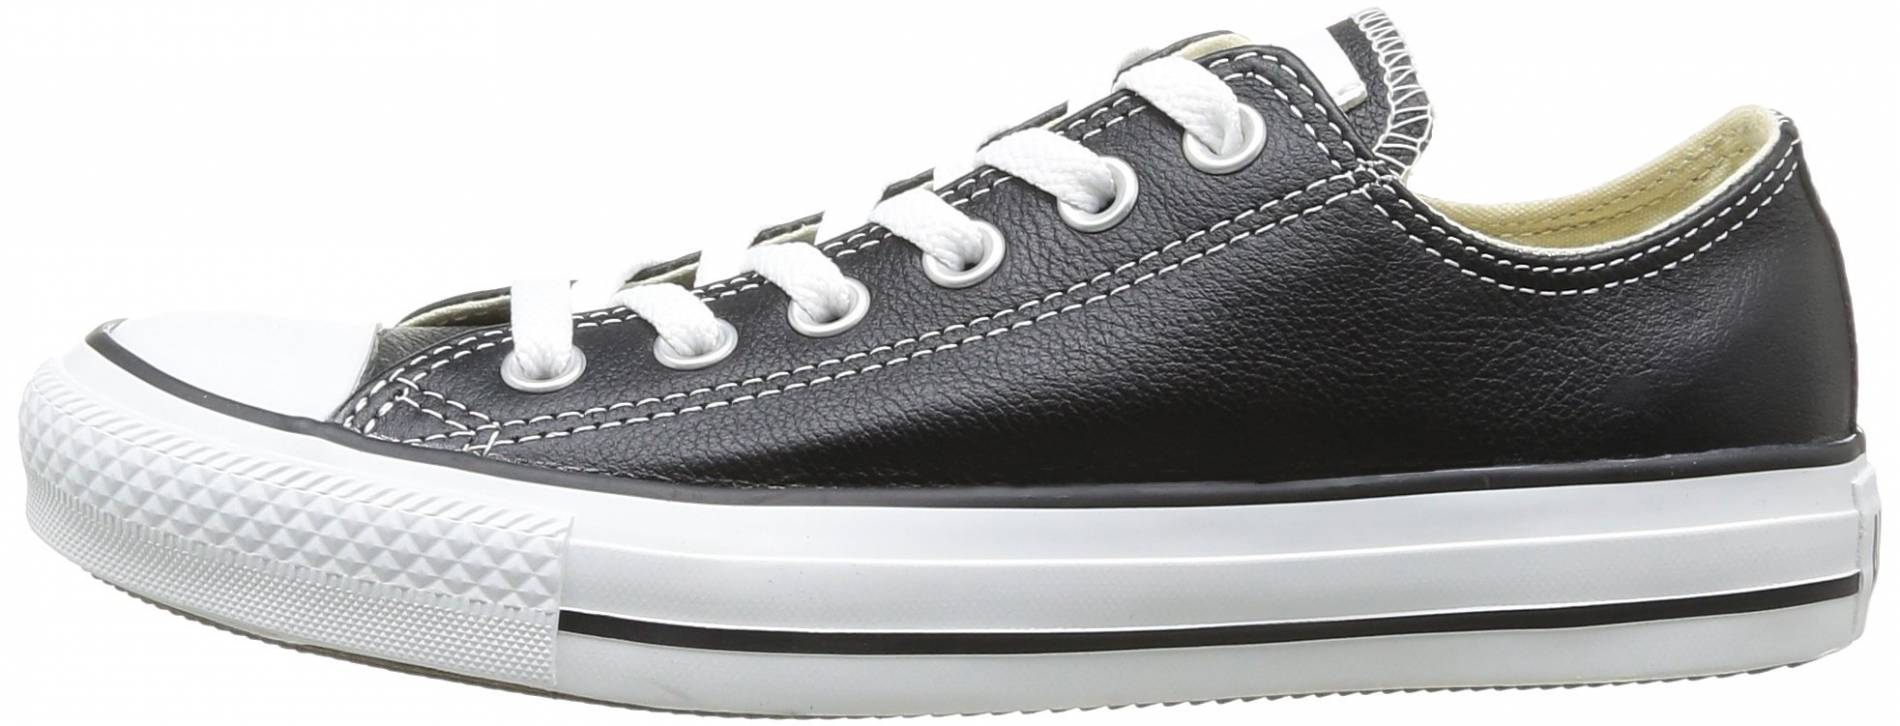 Converse Chuck Taylor All Star Leather Ox sneakers in 3 colors 